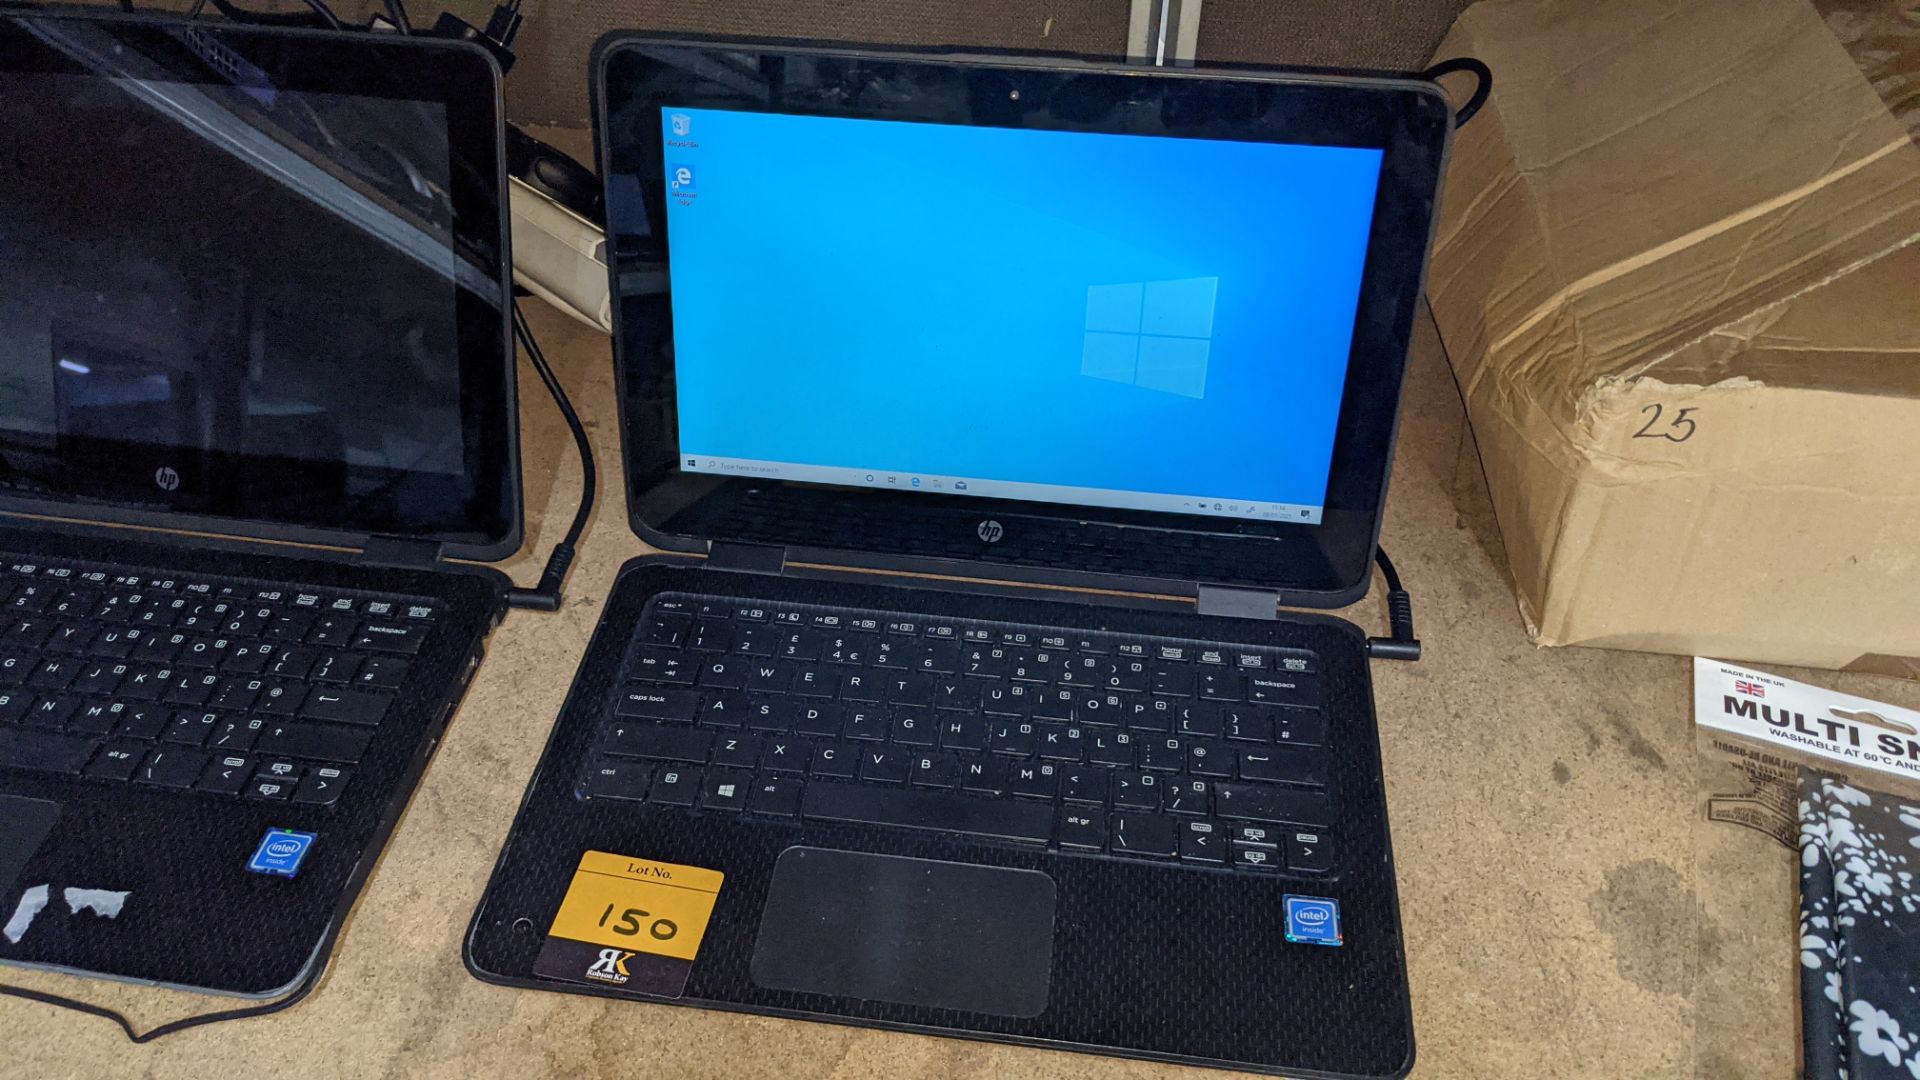 HP notebook ProBook x360 11 G1 EE, Celeron N3350 (1.10GHz), 4GB, 62.54GB, 11.5" Includes charger, bu - Image 2 of 8